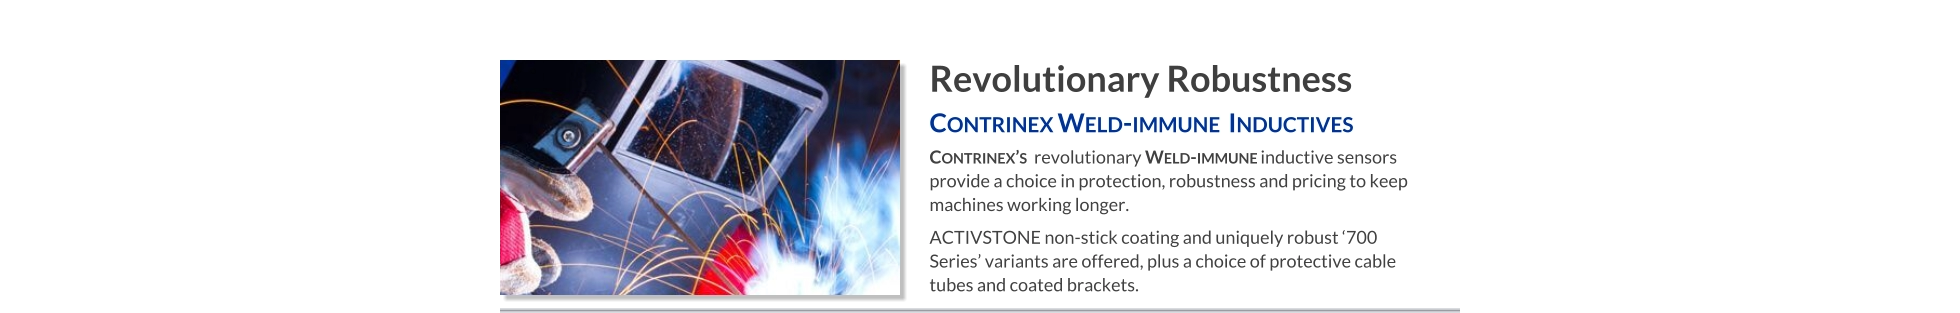 Revolutionary Robustness Contrinex Weld-immune  Inductives   Contrinex’s  revolutionary Weld-immune inductive sensors provide a choice in protection, robustness and pricing to keep machines working longer. ACTIVSTONE non-stick coating and uniquely robust ‘700 Series’ variants are offered, plus a choice of protective cable tubes and coated brackets.